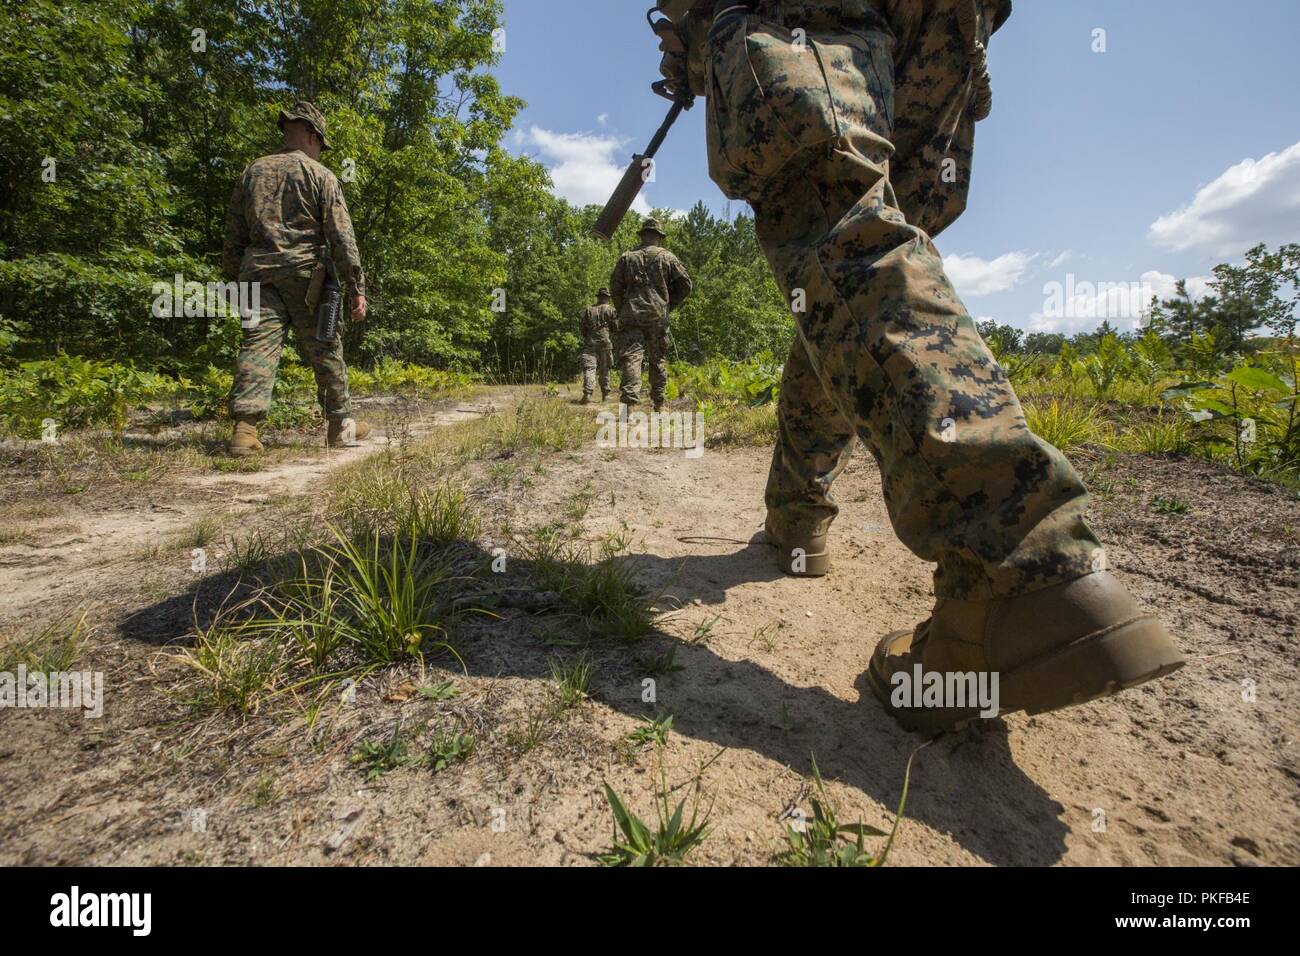 Scout snipers with 3rd Battalion, 25th Marine Regiment, conduct patrolling drills during Exercise Northern Strike at Camp Grayling, Mich., Aug. 11, 2018. Camp Grayling, the largest National Guard center in the country covering 147,000 acres, offers many large artillery, mortar, tank ranges and maneuver courses. Stock Photo